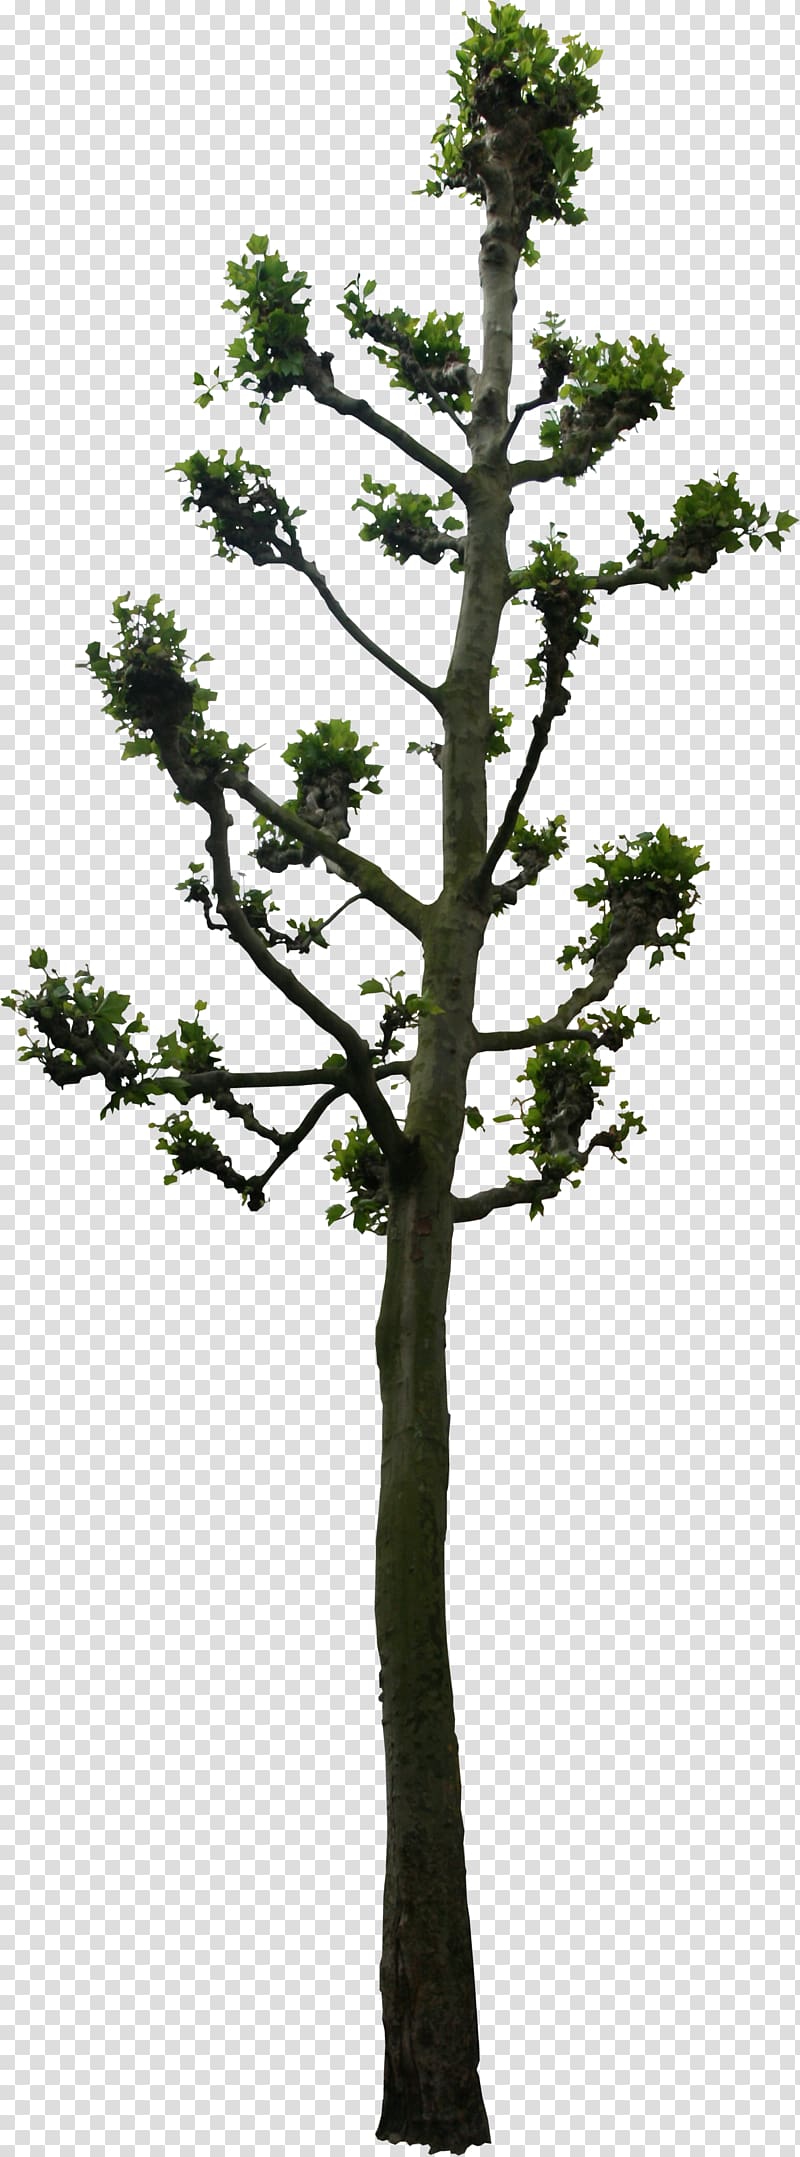 Tree Woody plant Lindens 3D computer graphics, tree transparent background PNG clipart